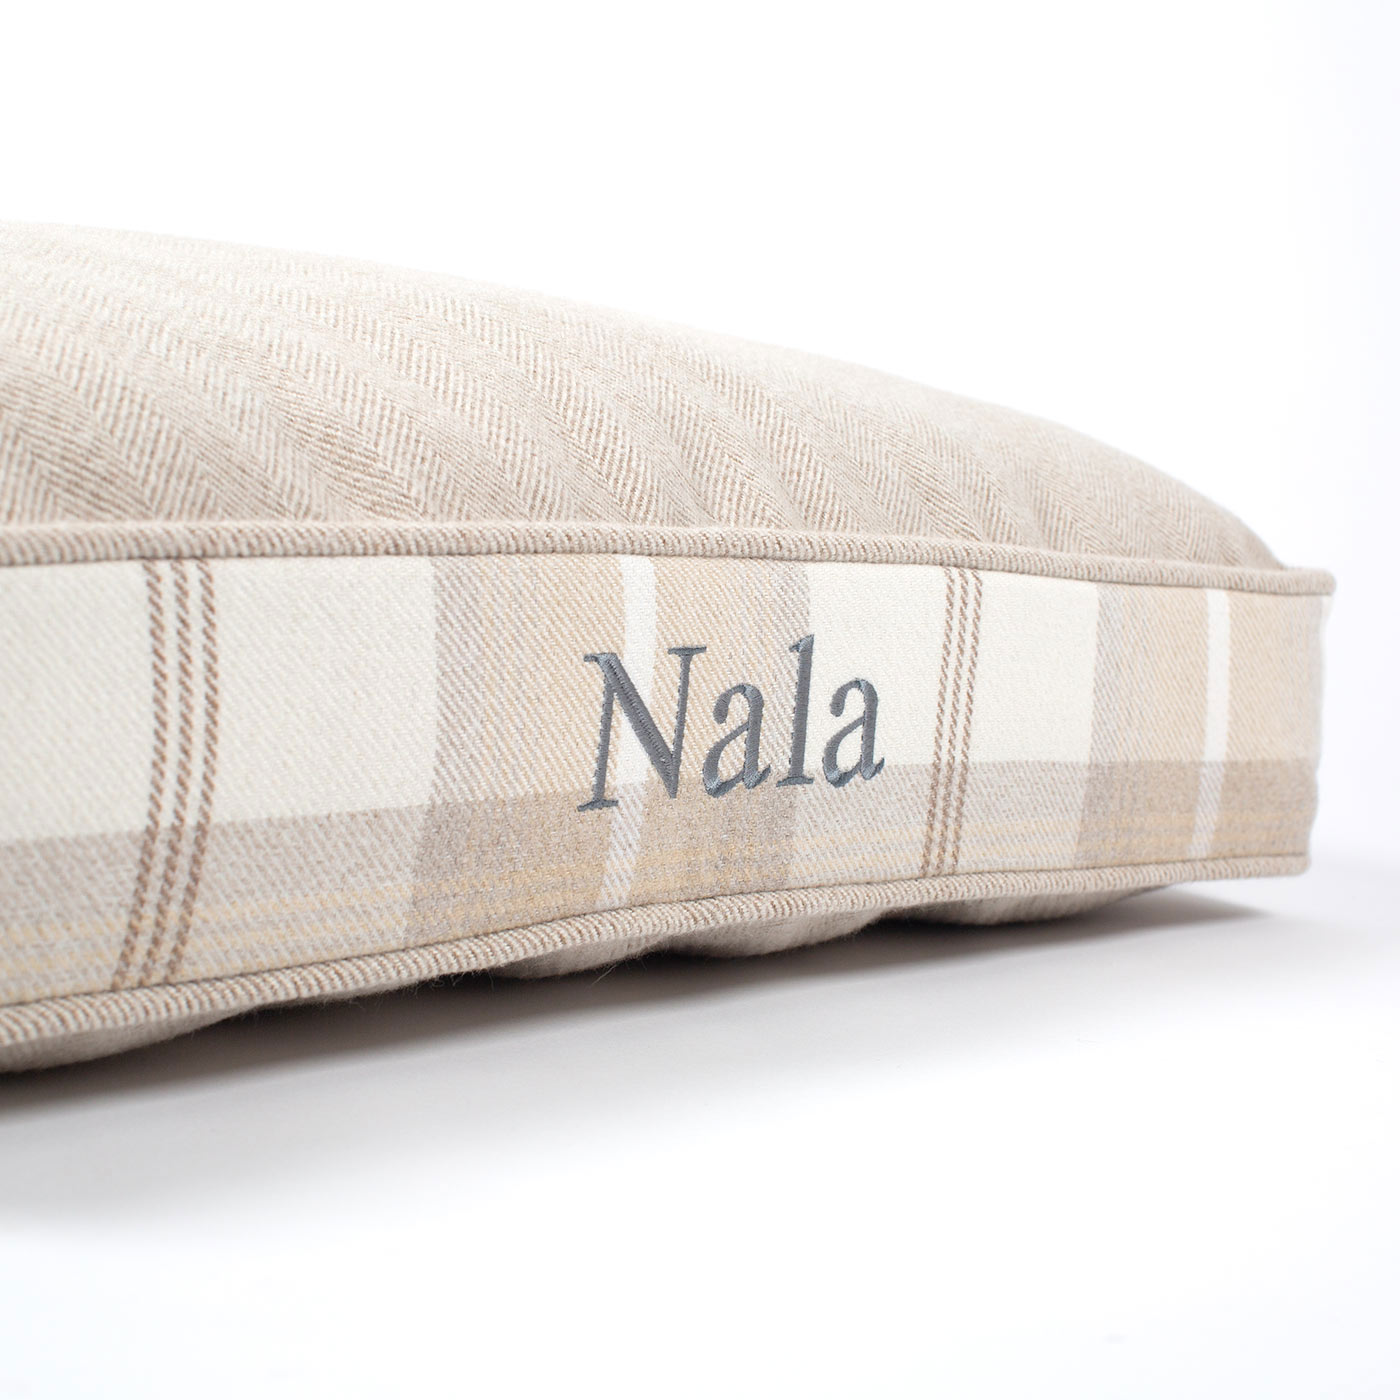 Luxury Dog Cage Cushion, The Perfect Dog Cage For The Ultimate Naptime, Now Available To Personalize at Lords & Labradors US